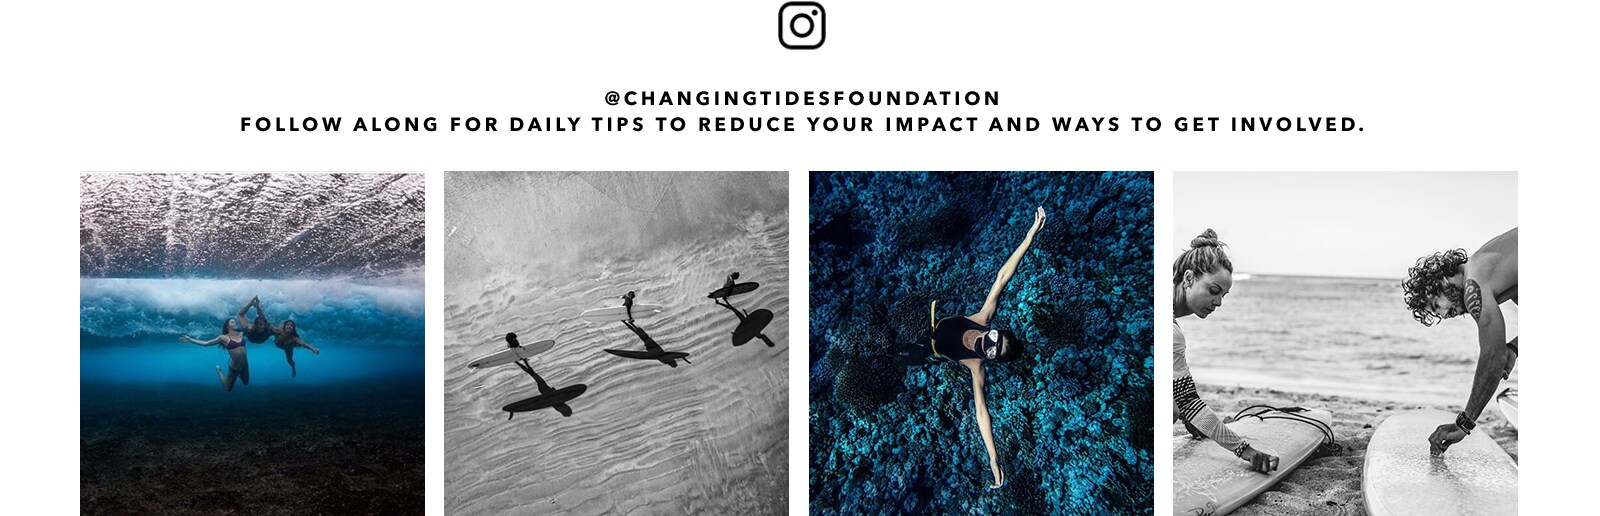 @changingtidesfoundation follow along for daily tips to reduce your impact and ways to get involved.